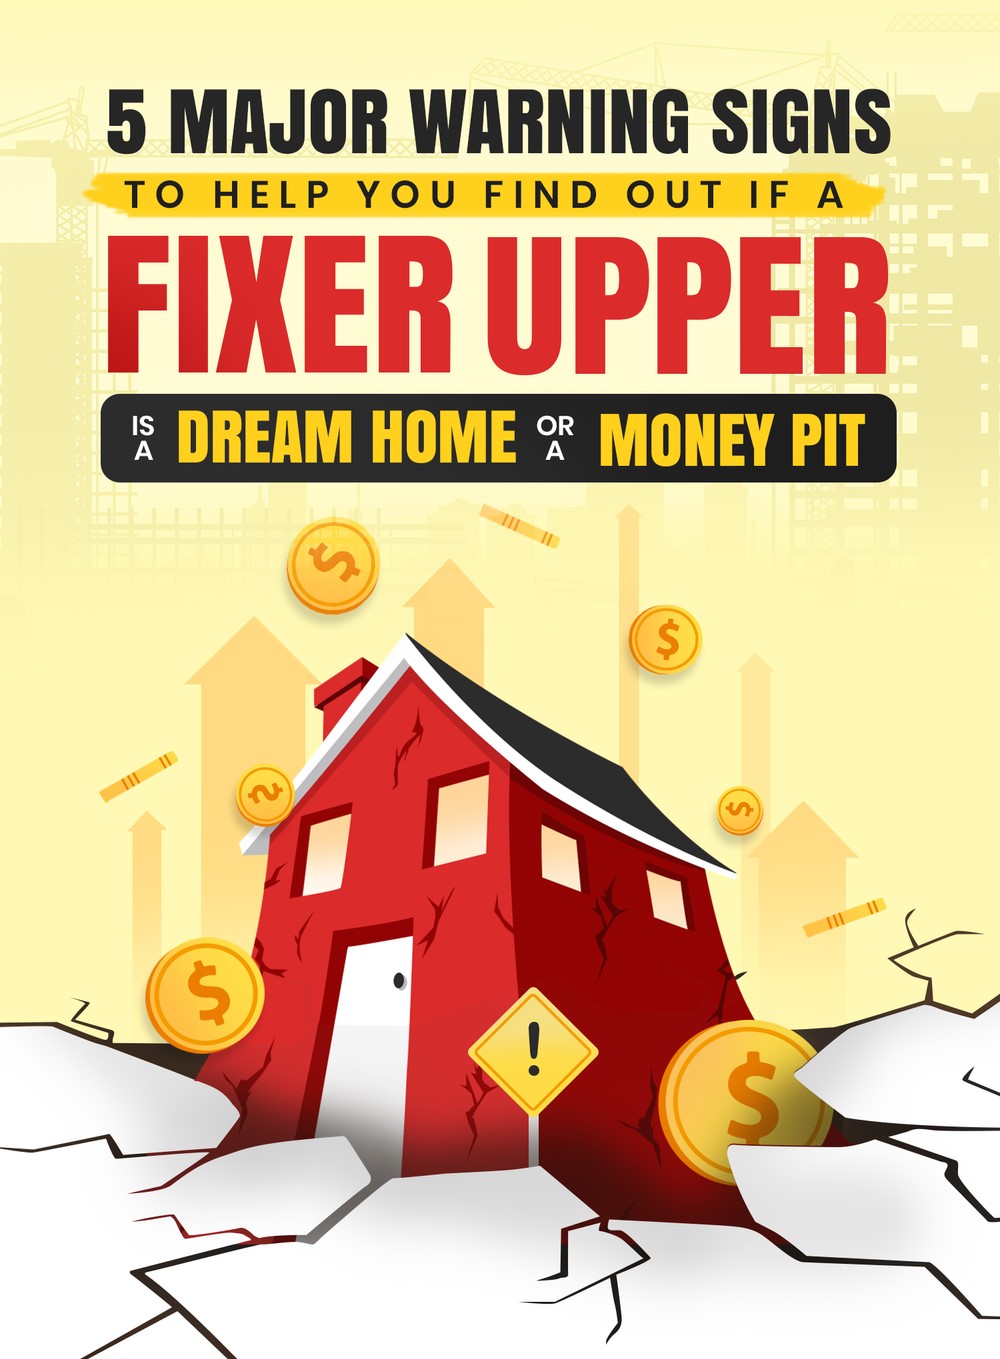 Is That Fixer Upper A Dream Home or A Money Pit_5 Major Warning Signs to Help You Find Out